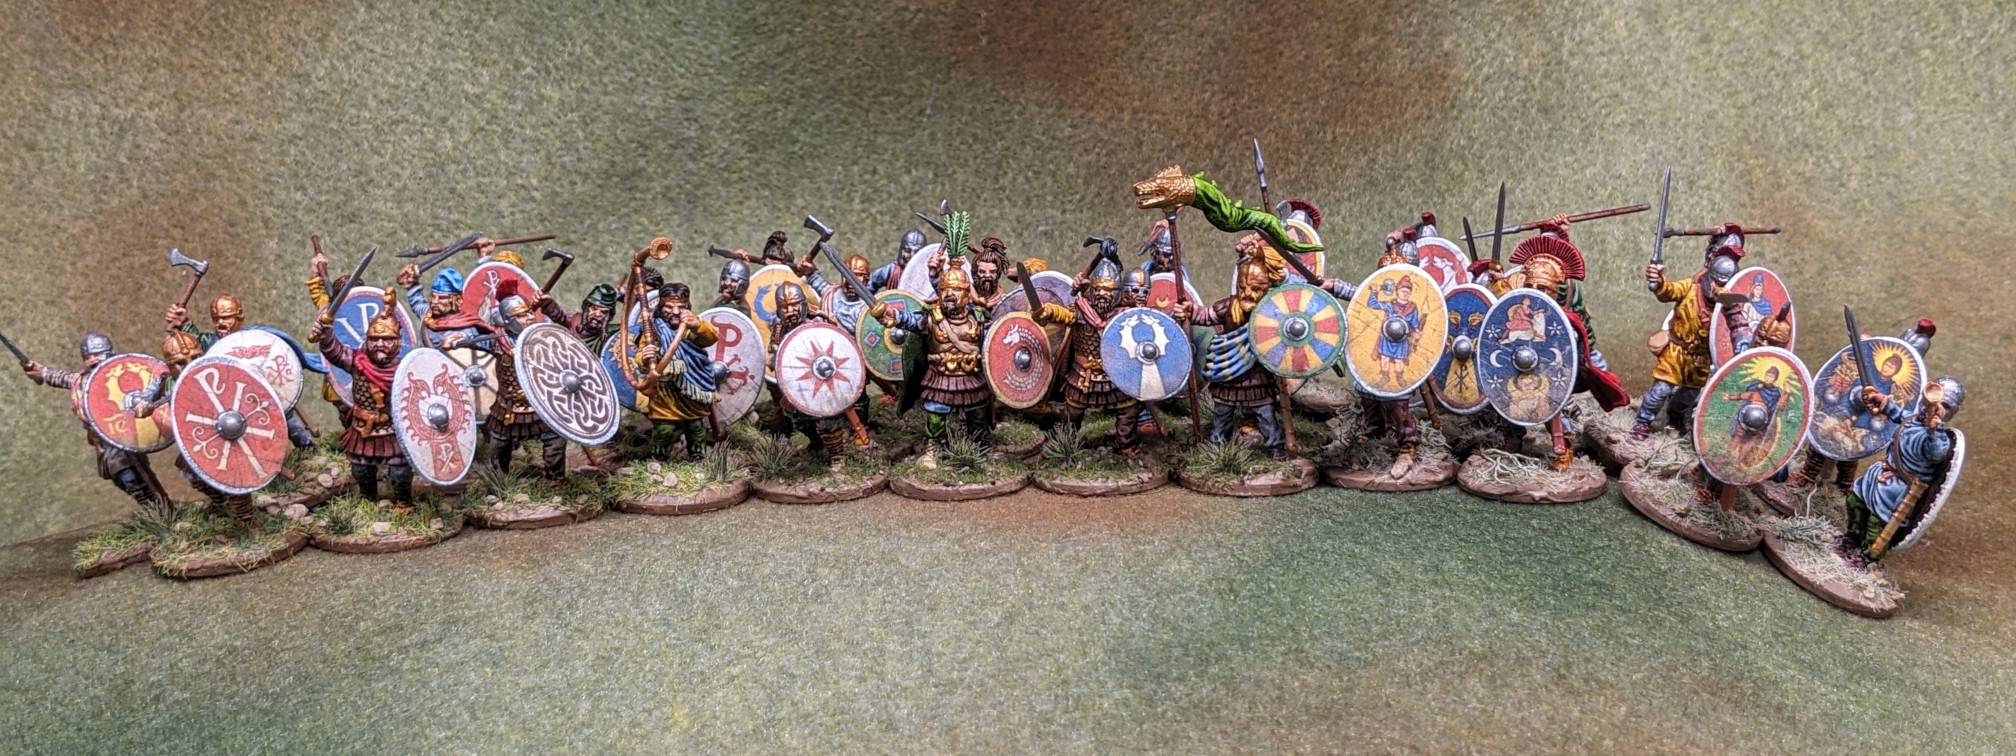 Late Roman Unarmored Infantry